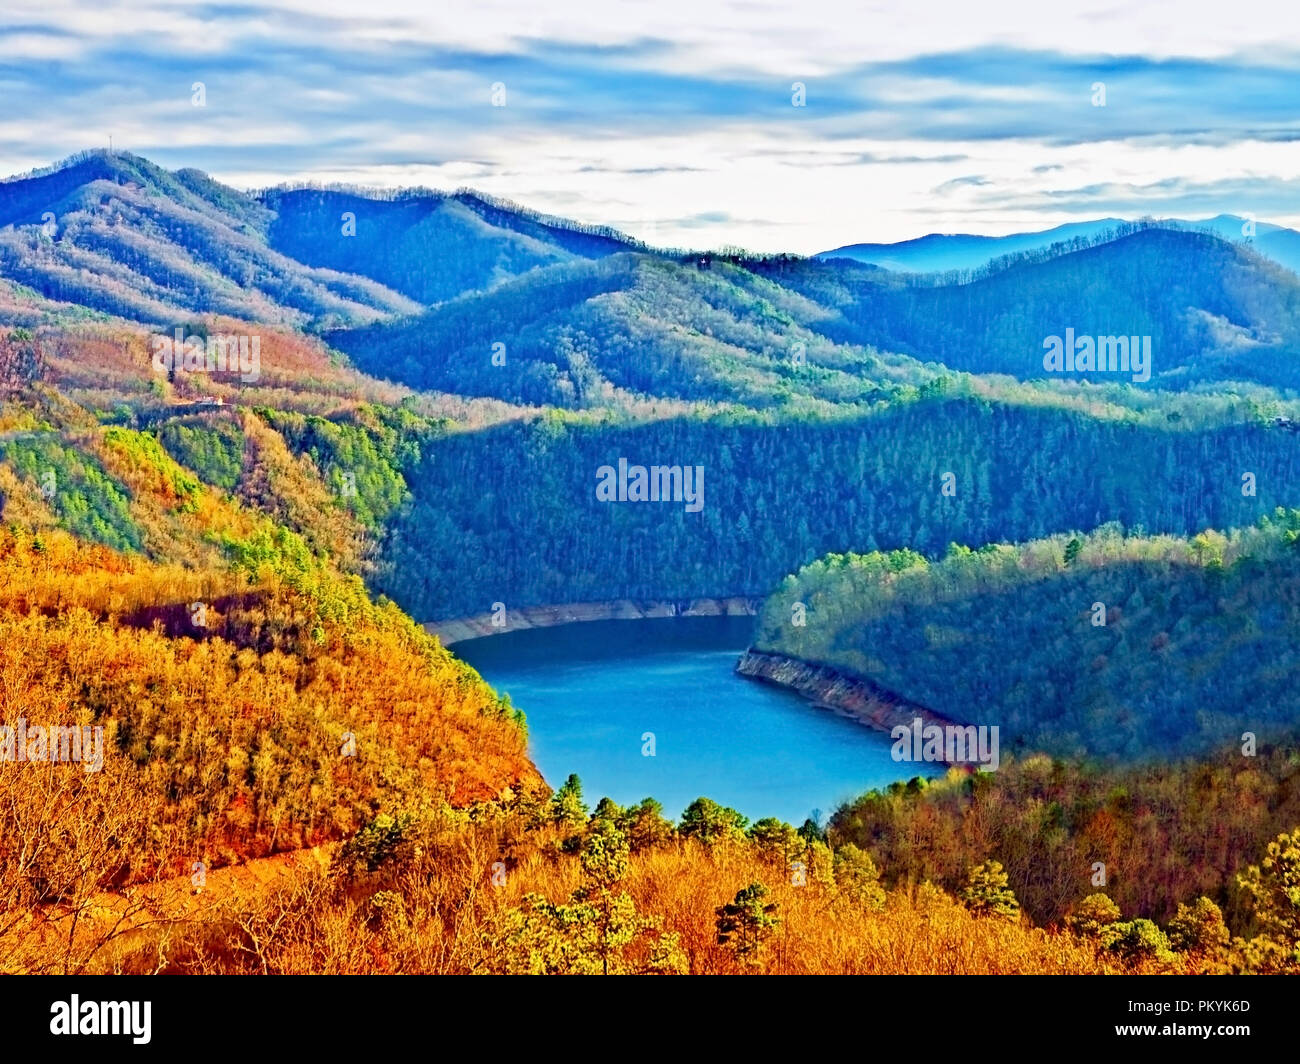 The sun is setting on this beautiful, early winter, landscape of the Smoky Mountains. Stock Photo